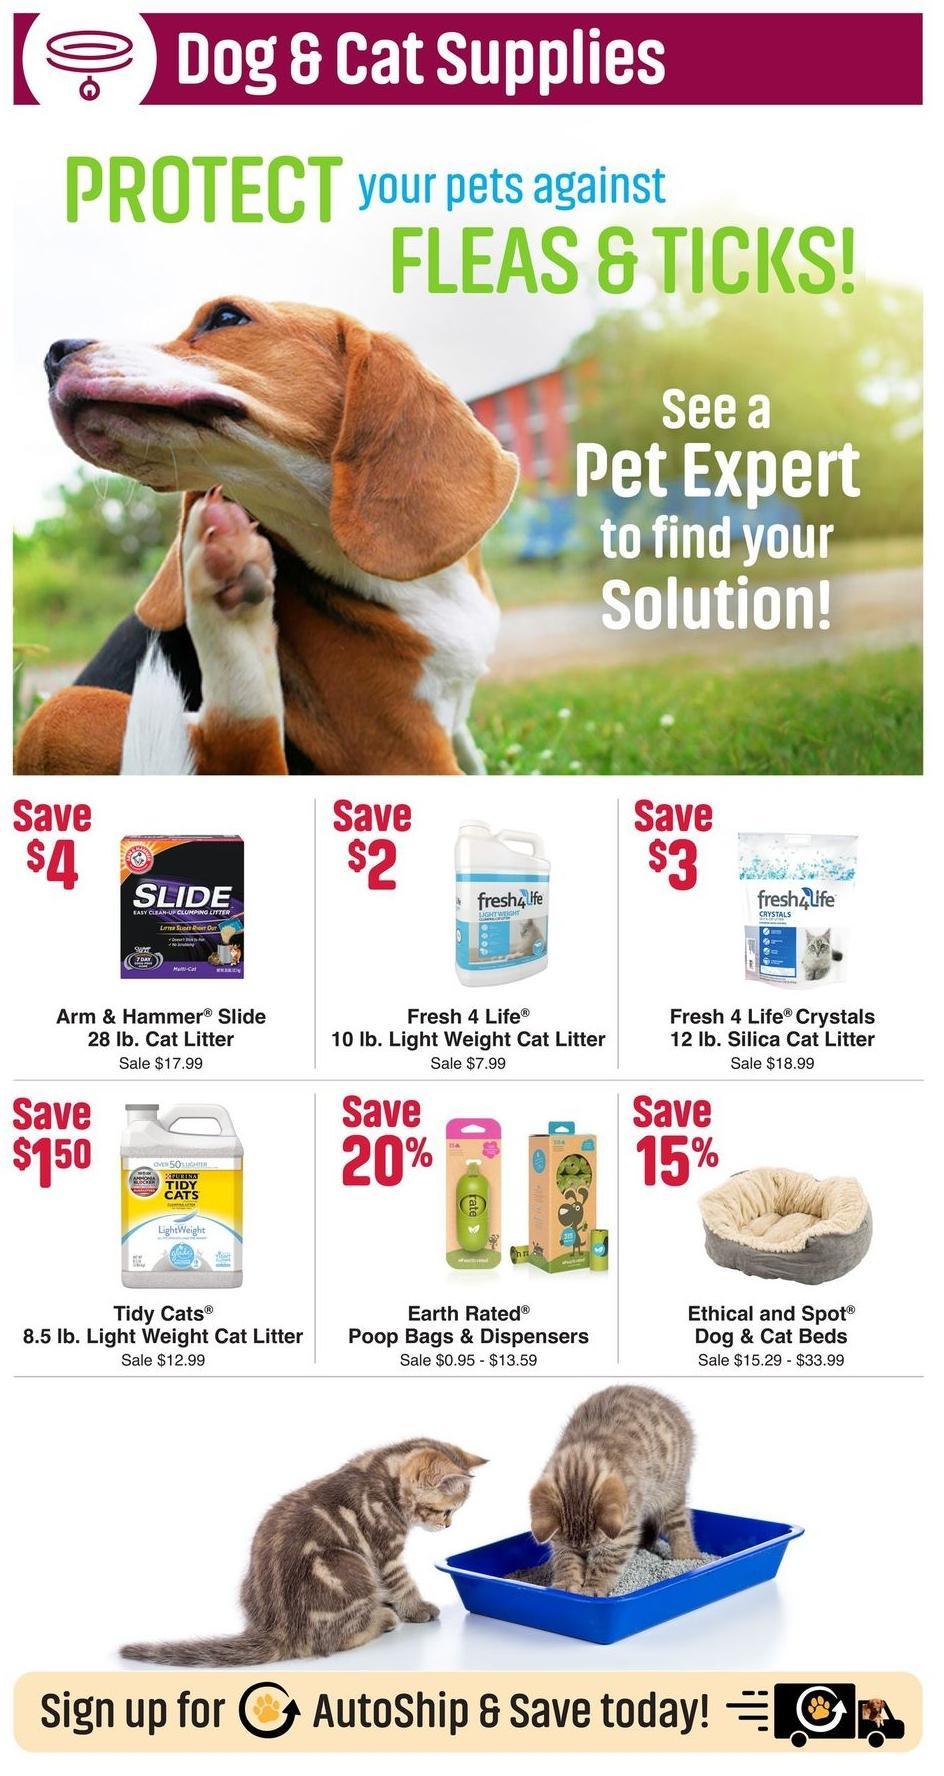 Pet Supermarket Weekly Ad from January 27